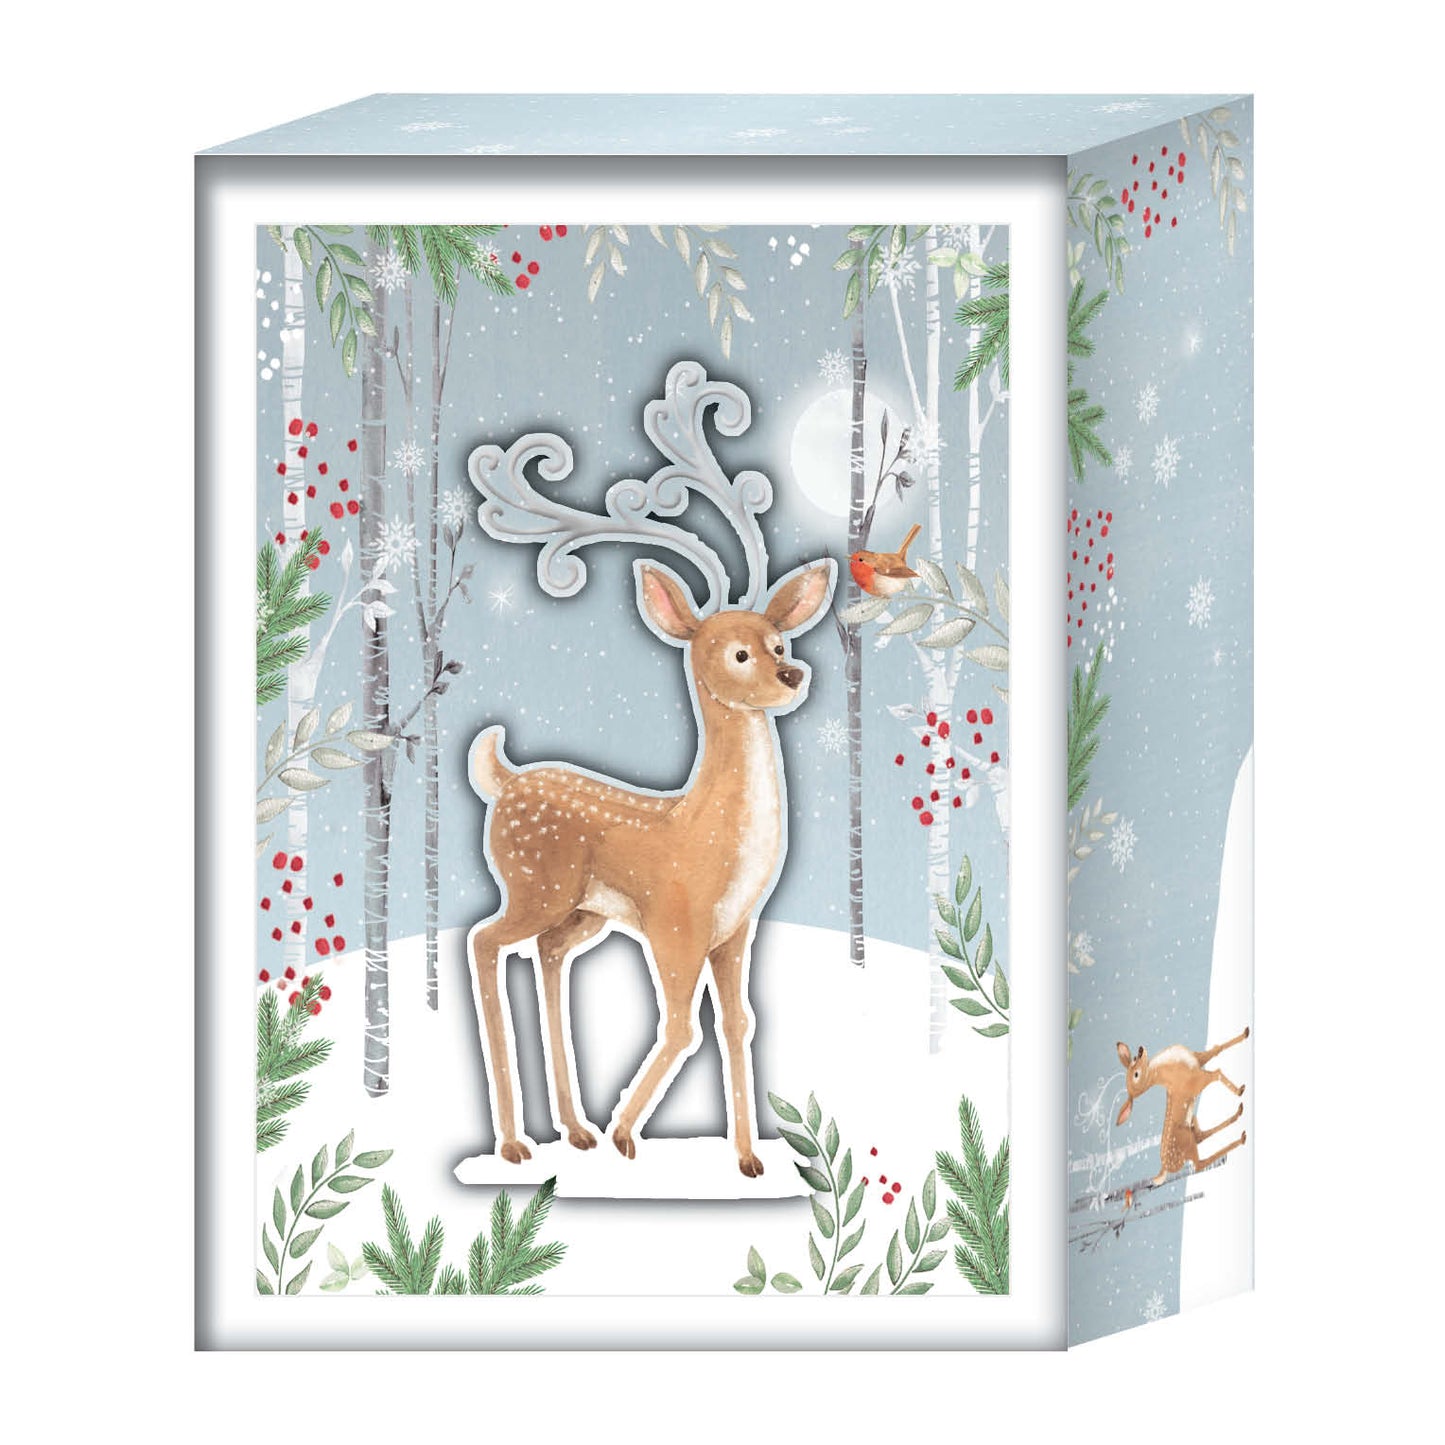 Deer in Forest - Boxed Christmas Cards -15 Cards